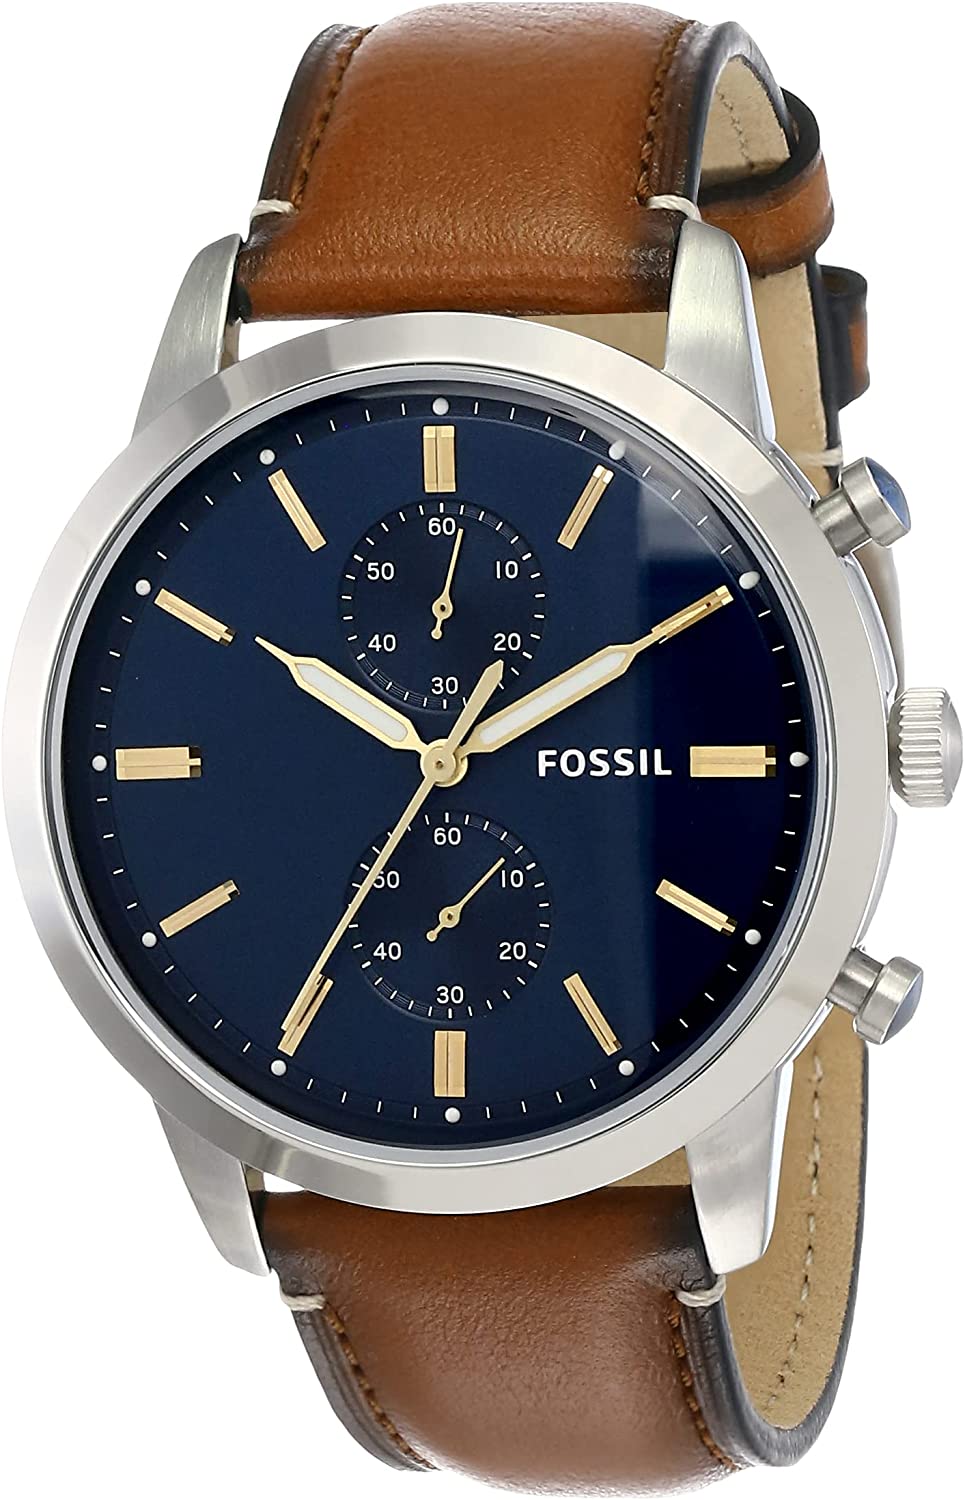 Fossil Men's Townsman Stainless Steel and Leather Casual Quartz Chronograph Watch